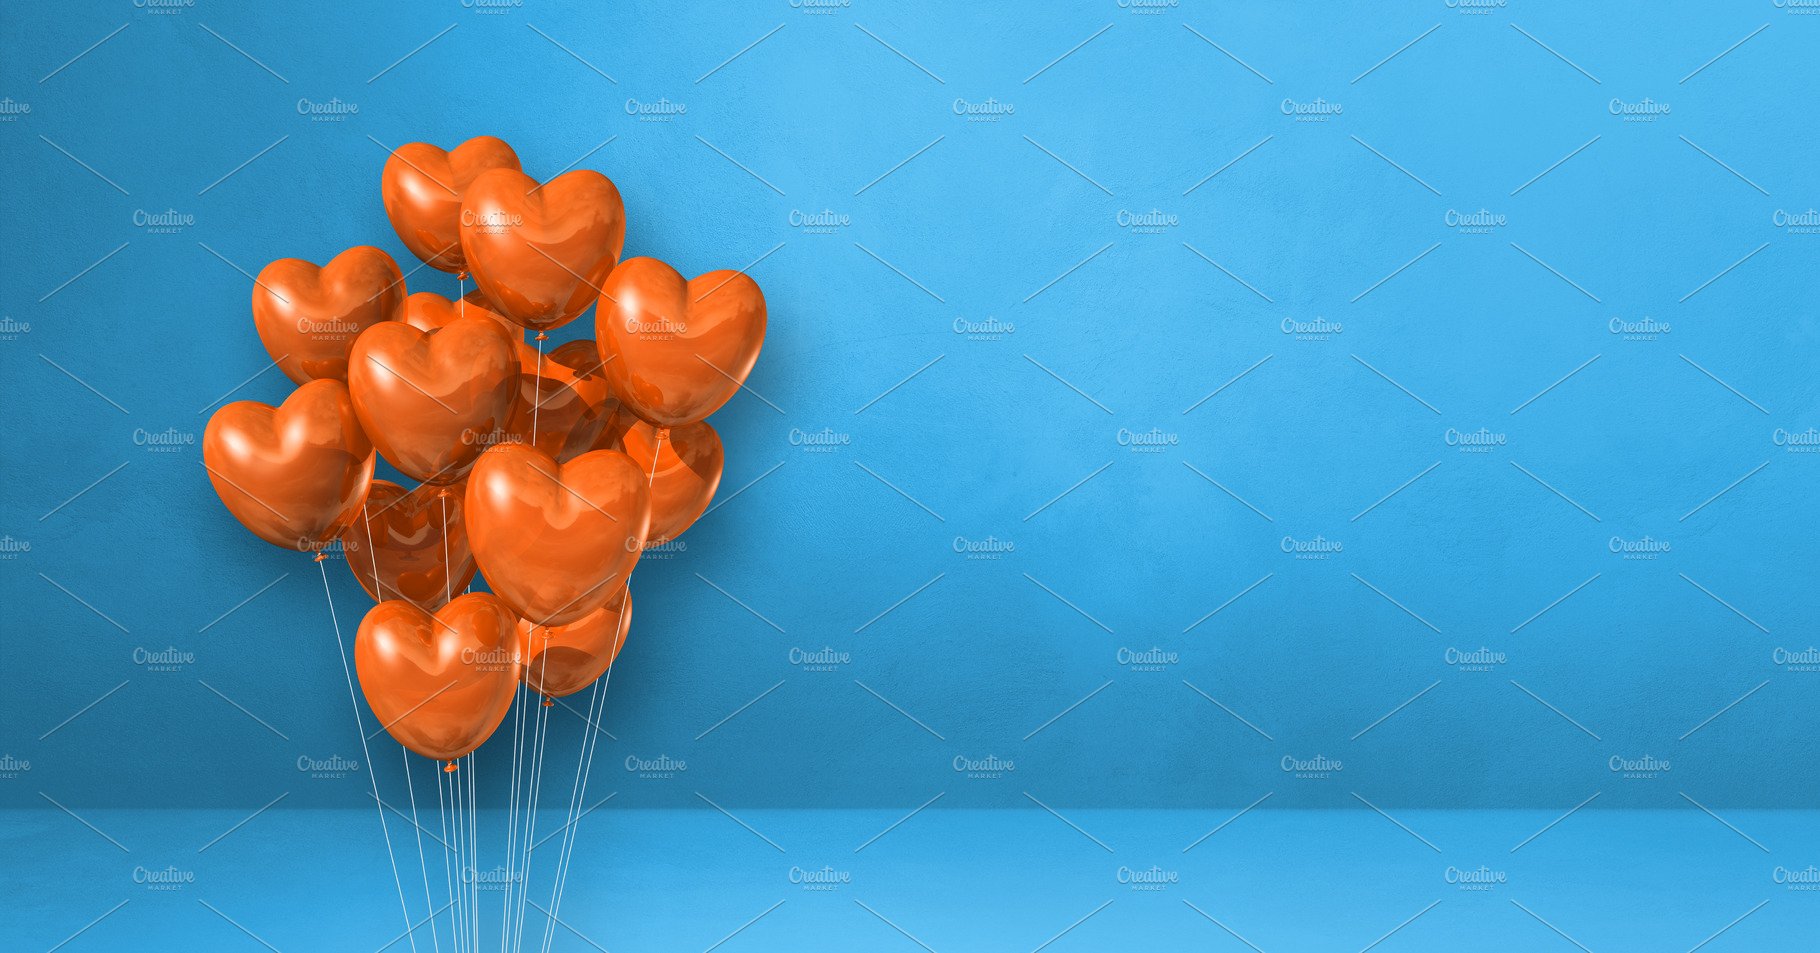 Orange heart shape balloons bunch on a blue wall background. Hor cover image.